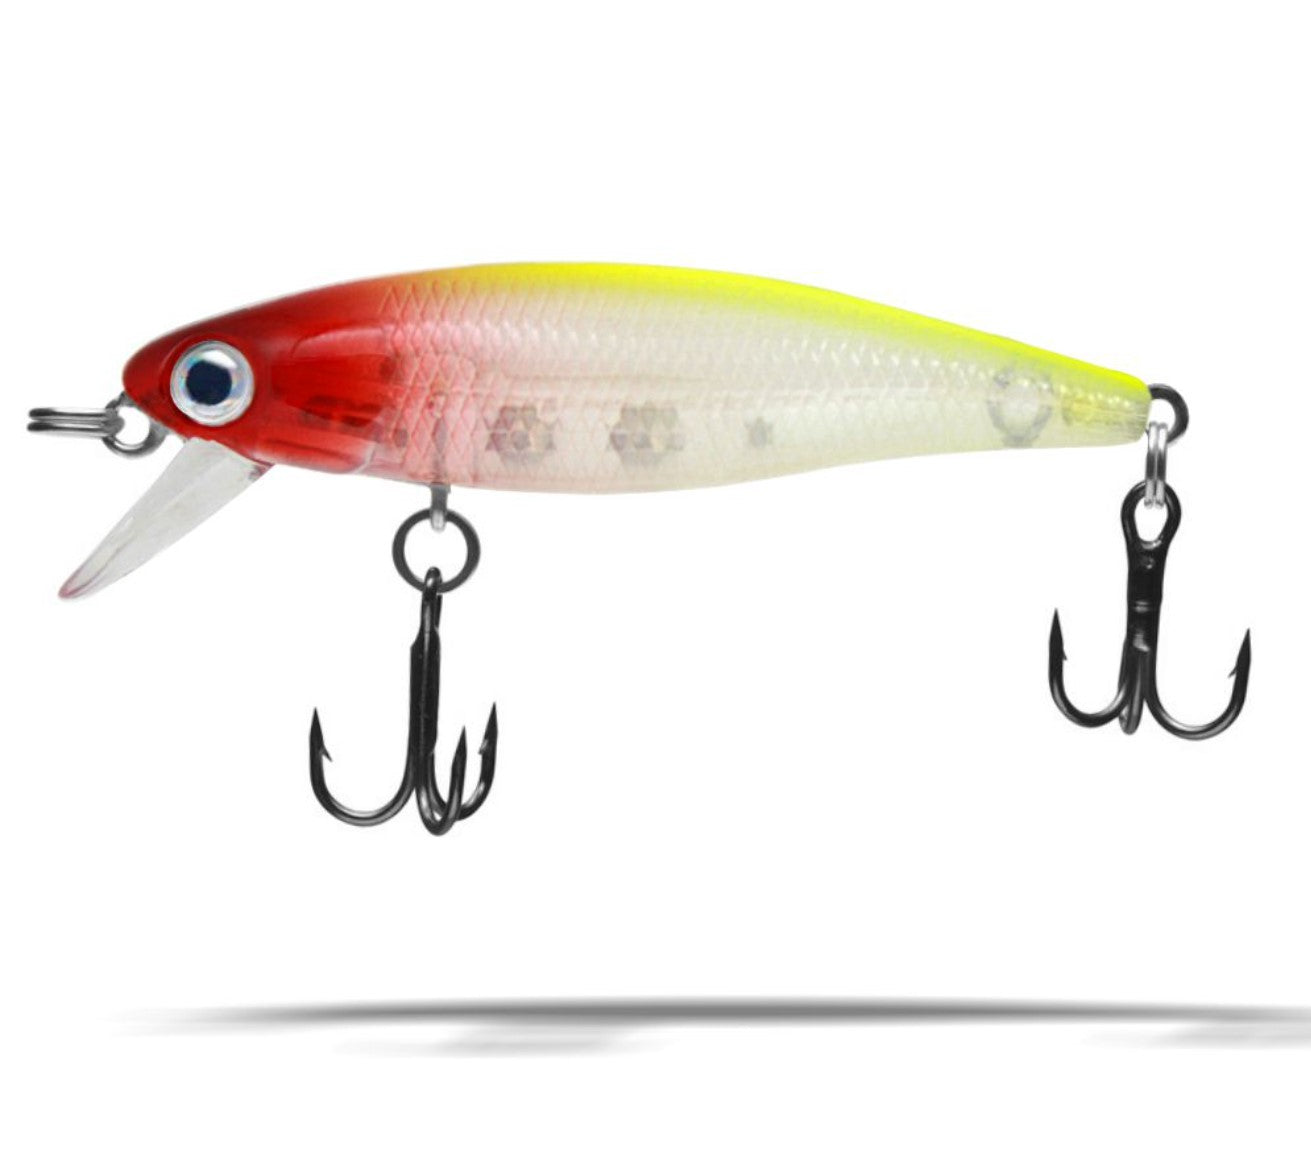 Dynamic Lures HD Trout (Ghost Clown) – Trophy Trout Lures and Fly Fishing